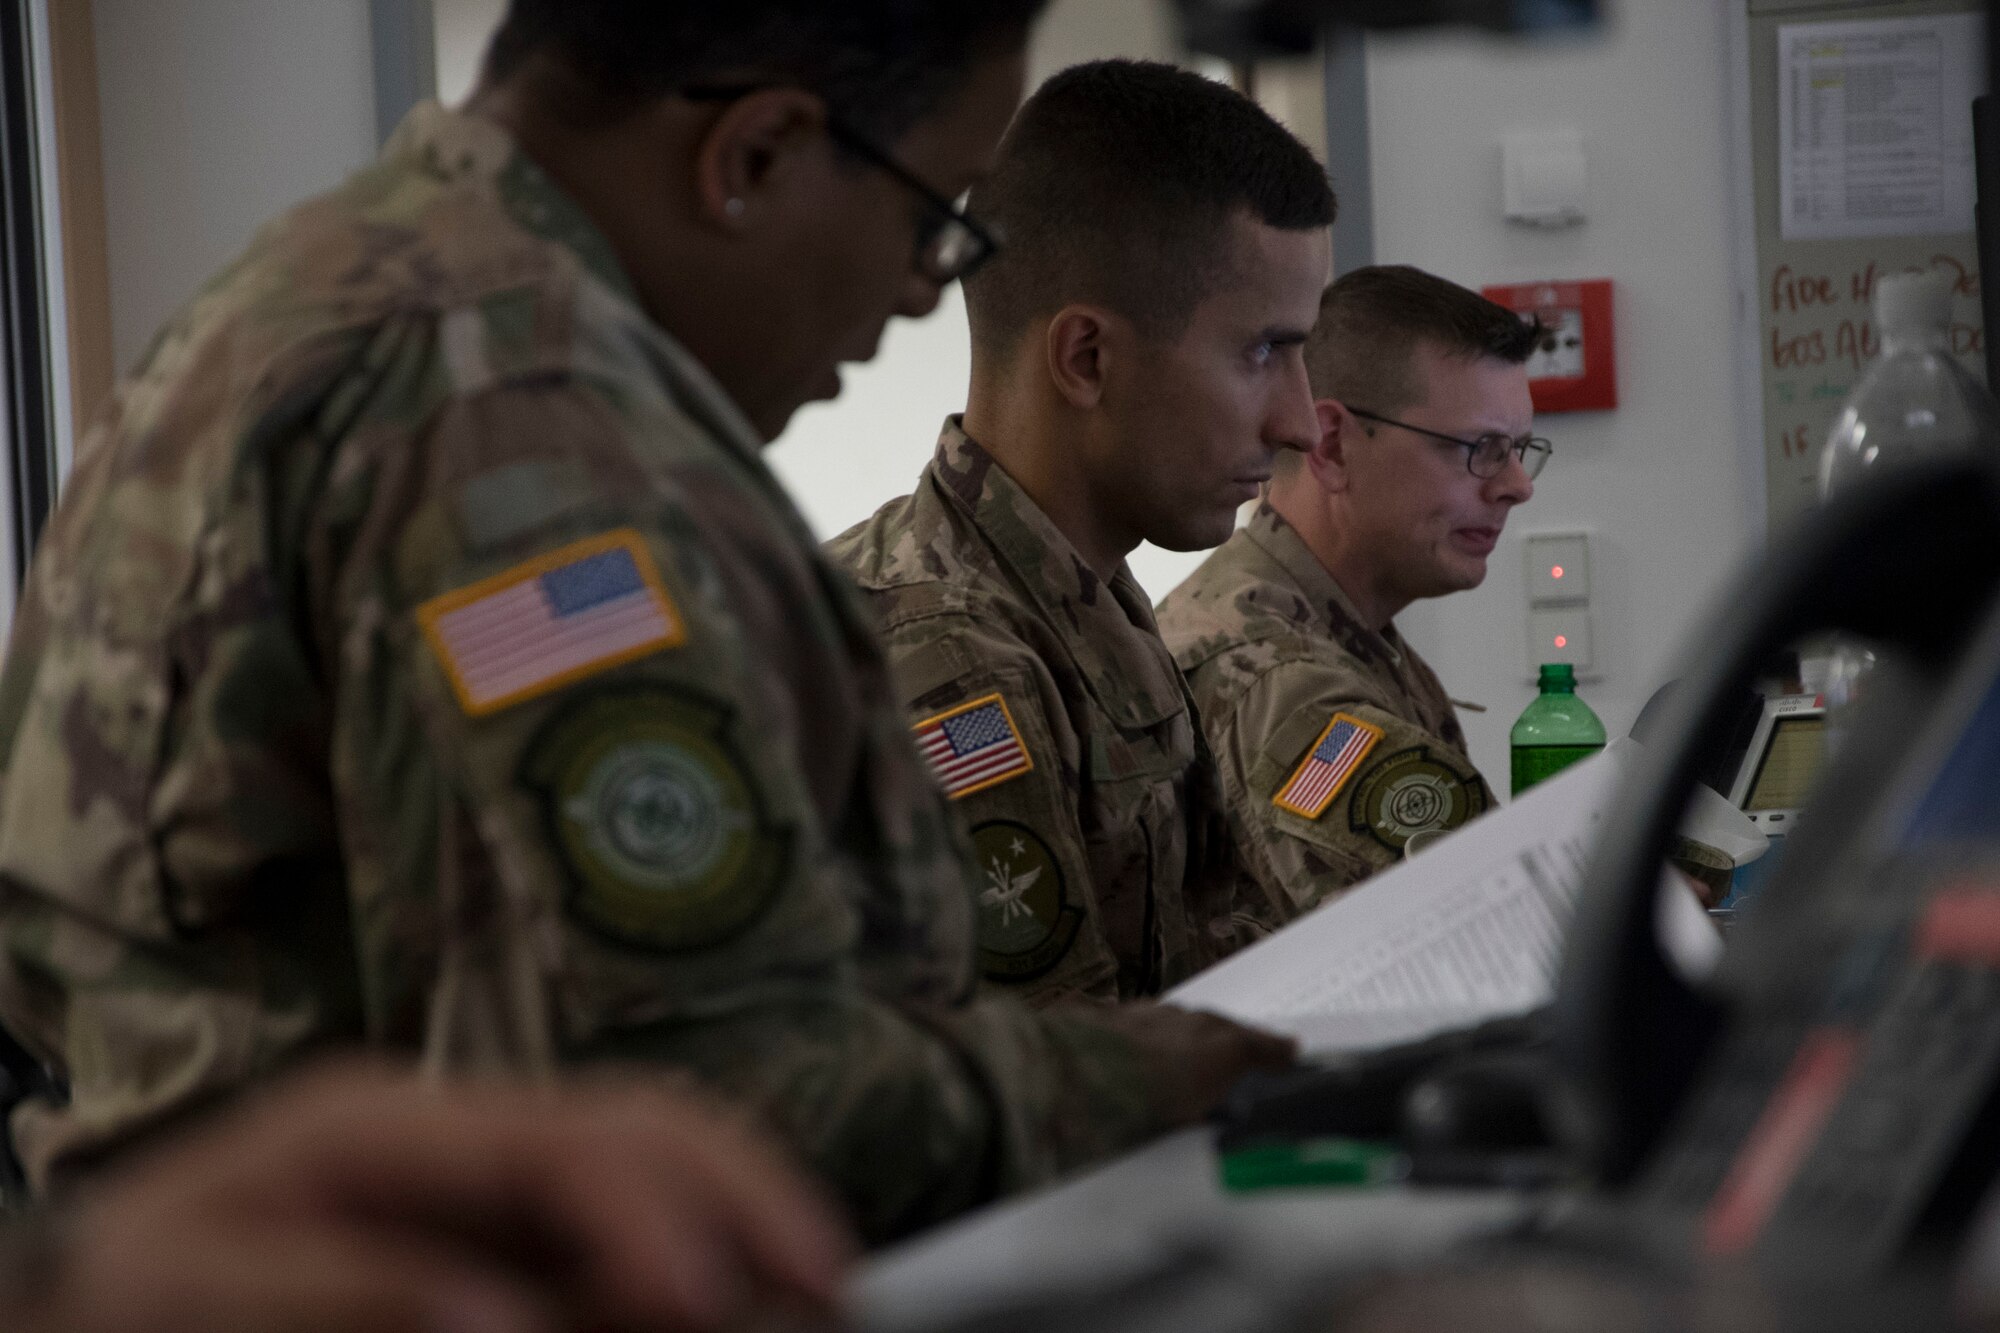 Airmen from the 621st Contingency Response Wing, located bi-coastally at Joint Base McGuire-Dix-Lakehurst, New Jersey, and Travis Air Force Base, California, provide command and control during Exercise Swift Response 18 at Ramstein Air Base, RP, Germany on June 5, 2018. (U.S. Air Force photo by Tech Sgt. Robert Waggoner/RELEASED)